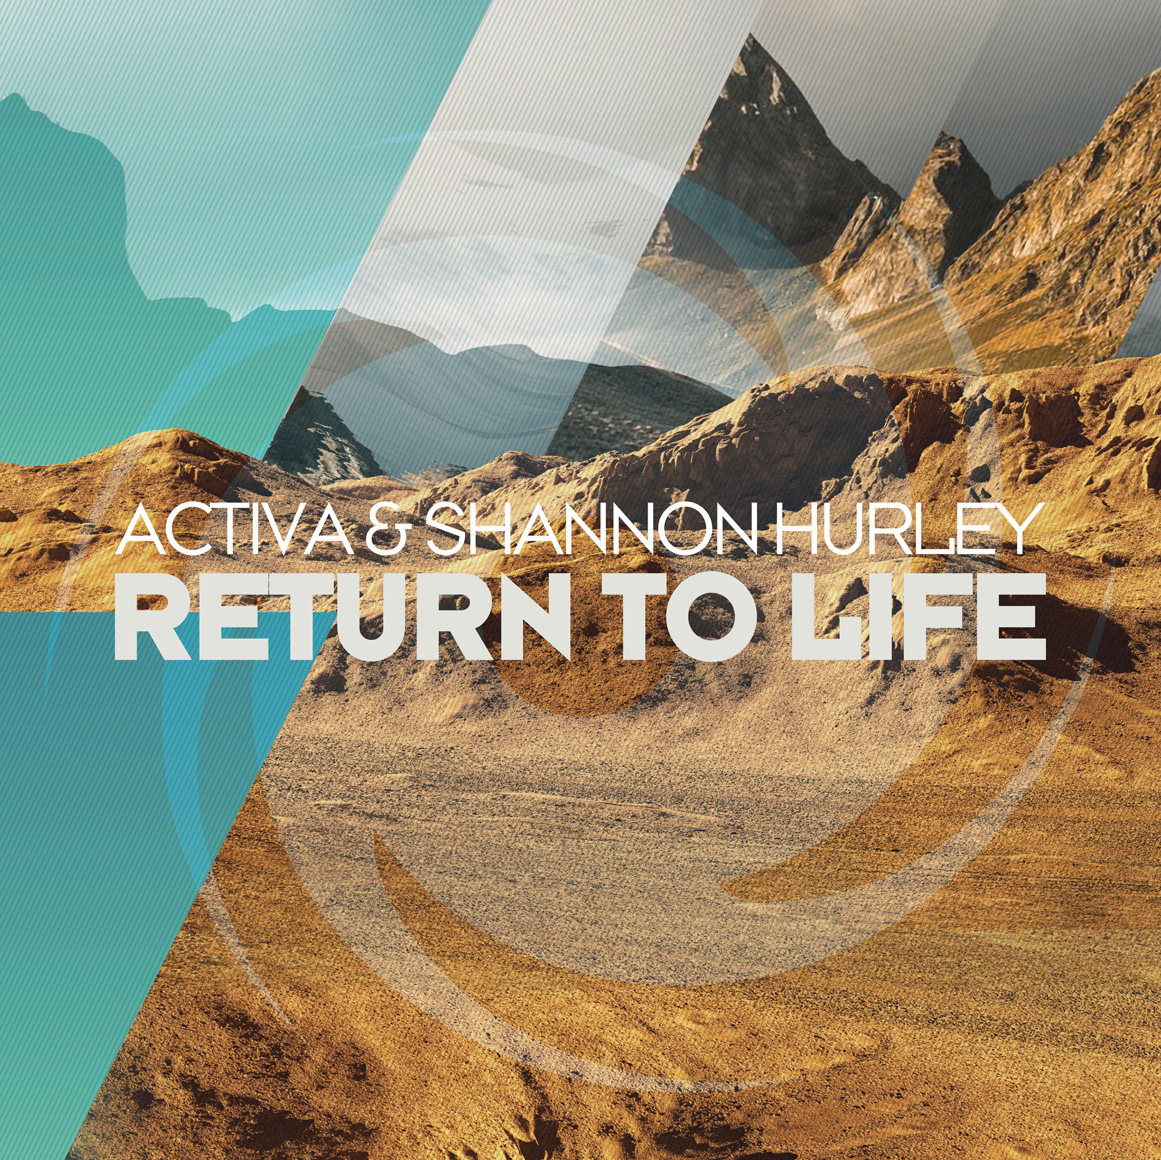 Activa and Shannon Hurley presents Return To Life on Black Hole Recordings